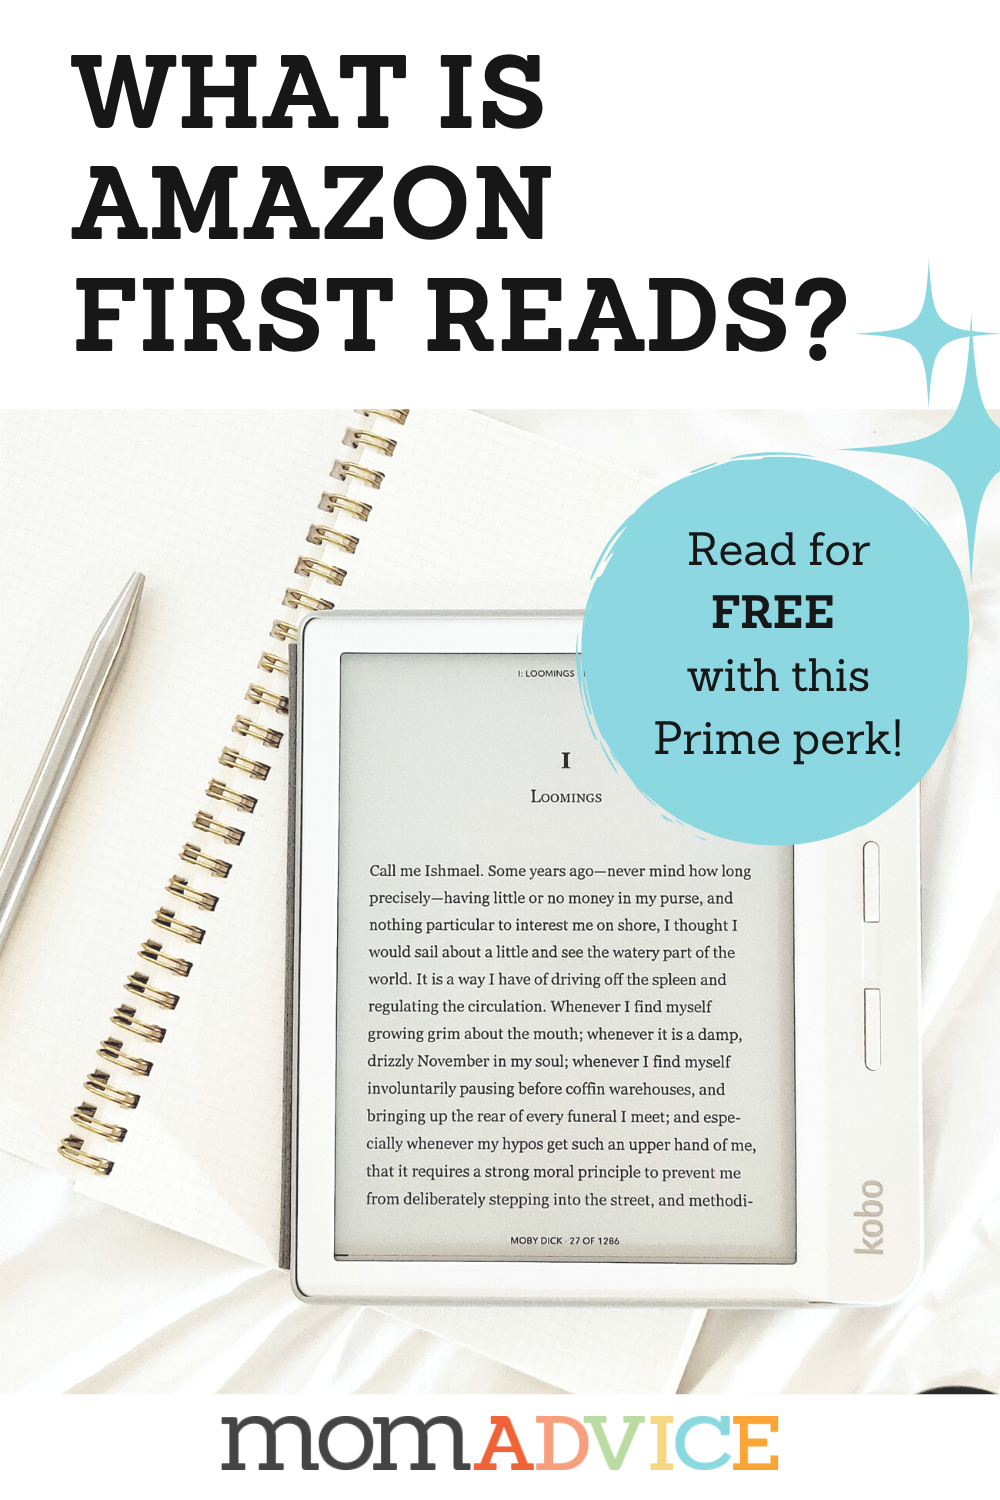 Amazon First Reads: The Prime Reading Perk I Love For My ...